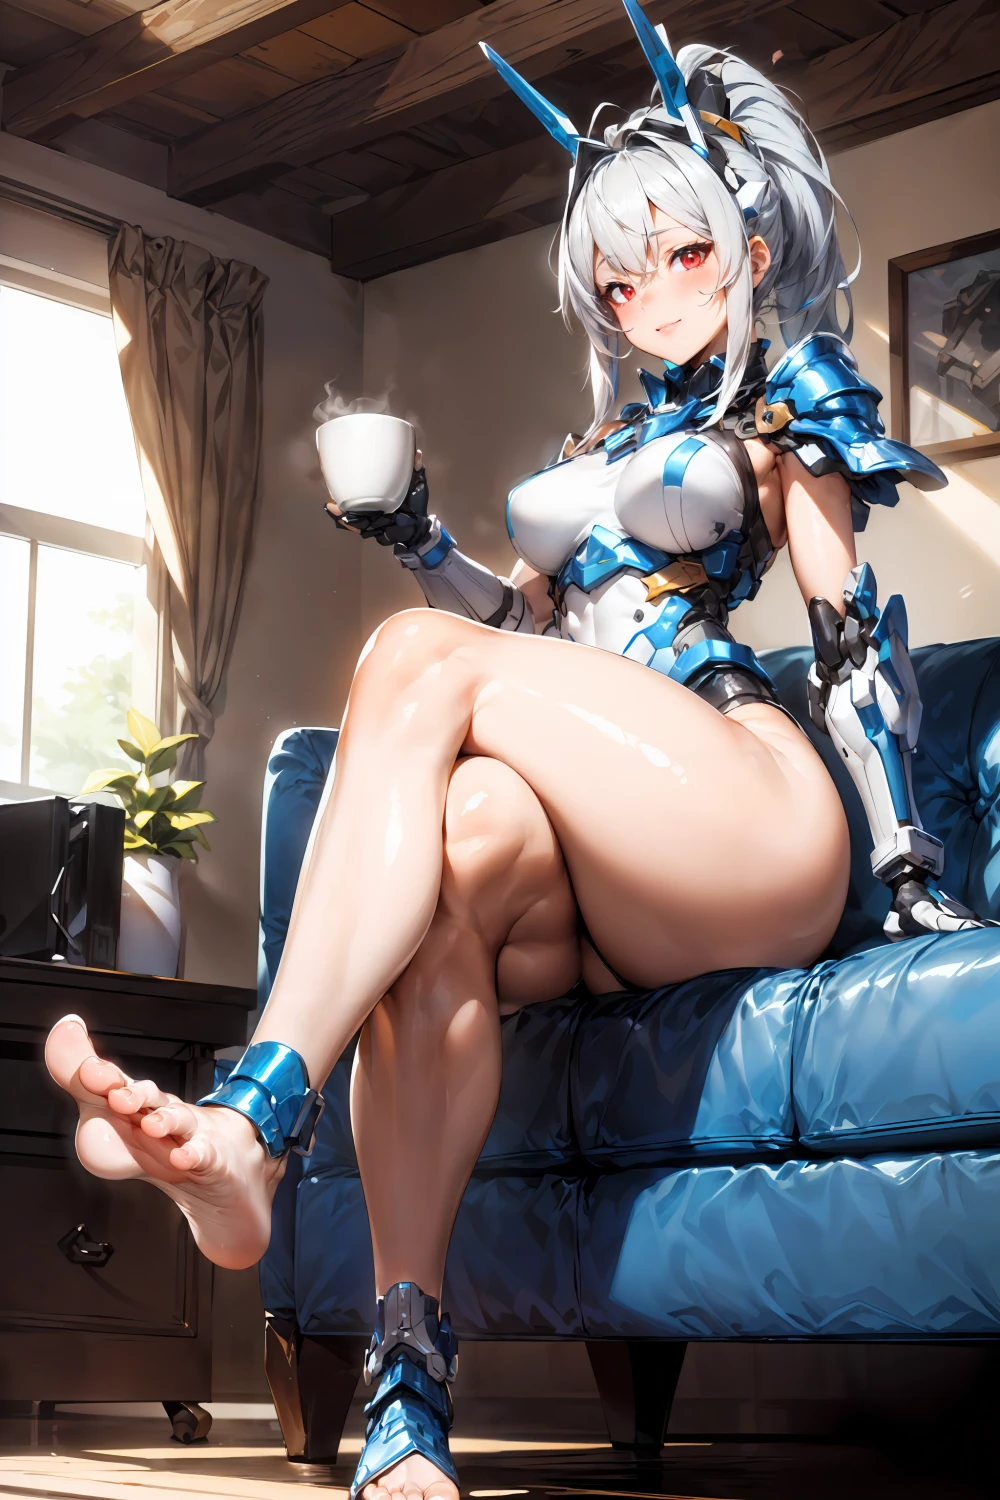 thighs-anime-style-all-ages-6